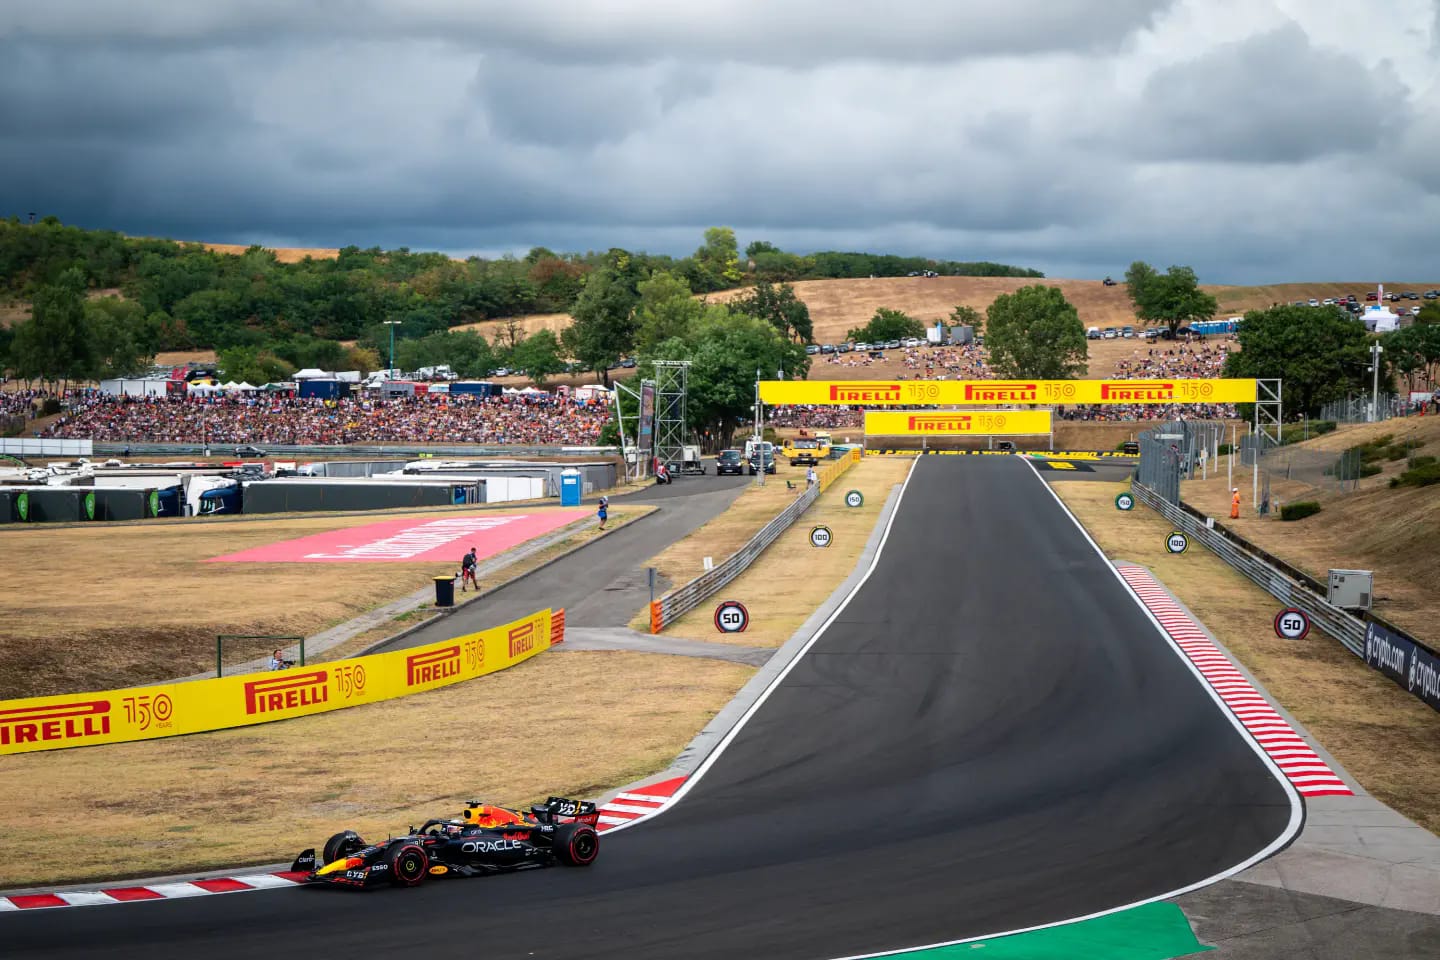 Taxi Company Wins Contract to Transport Visitors to Hungarian Grand Prix